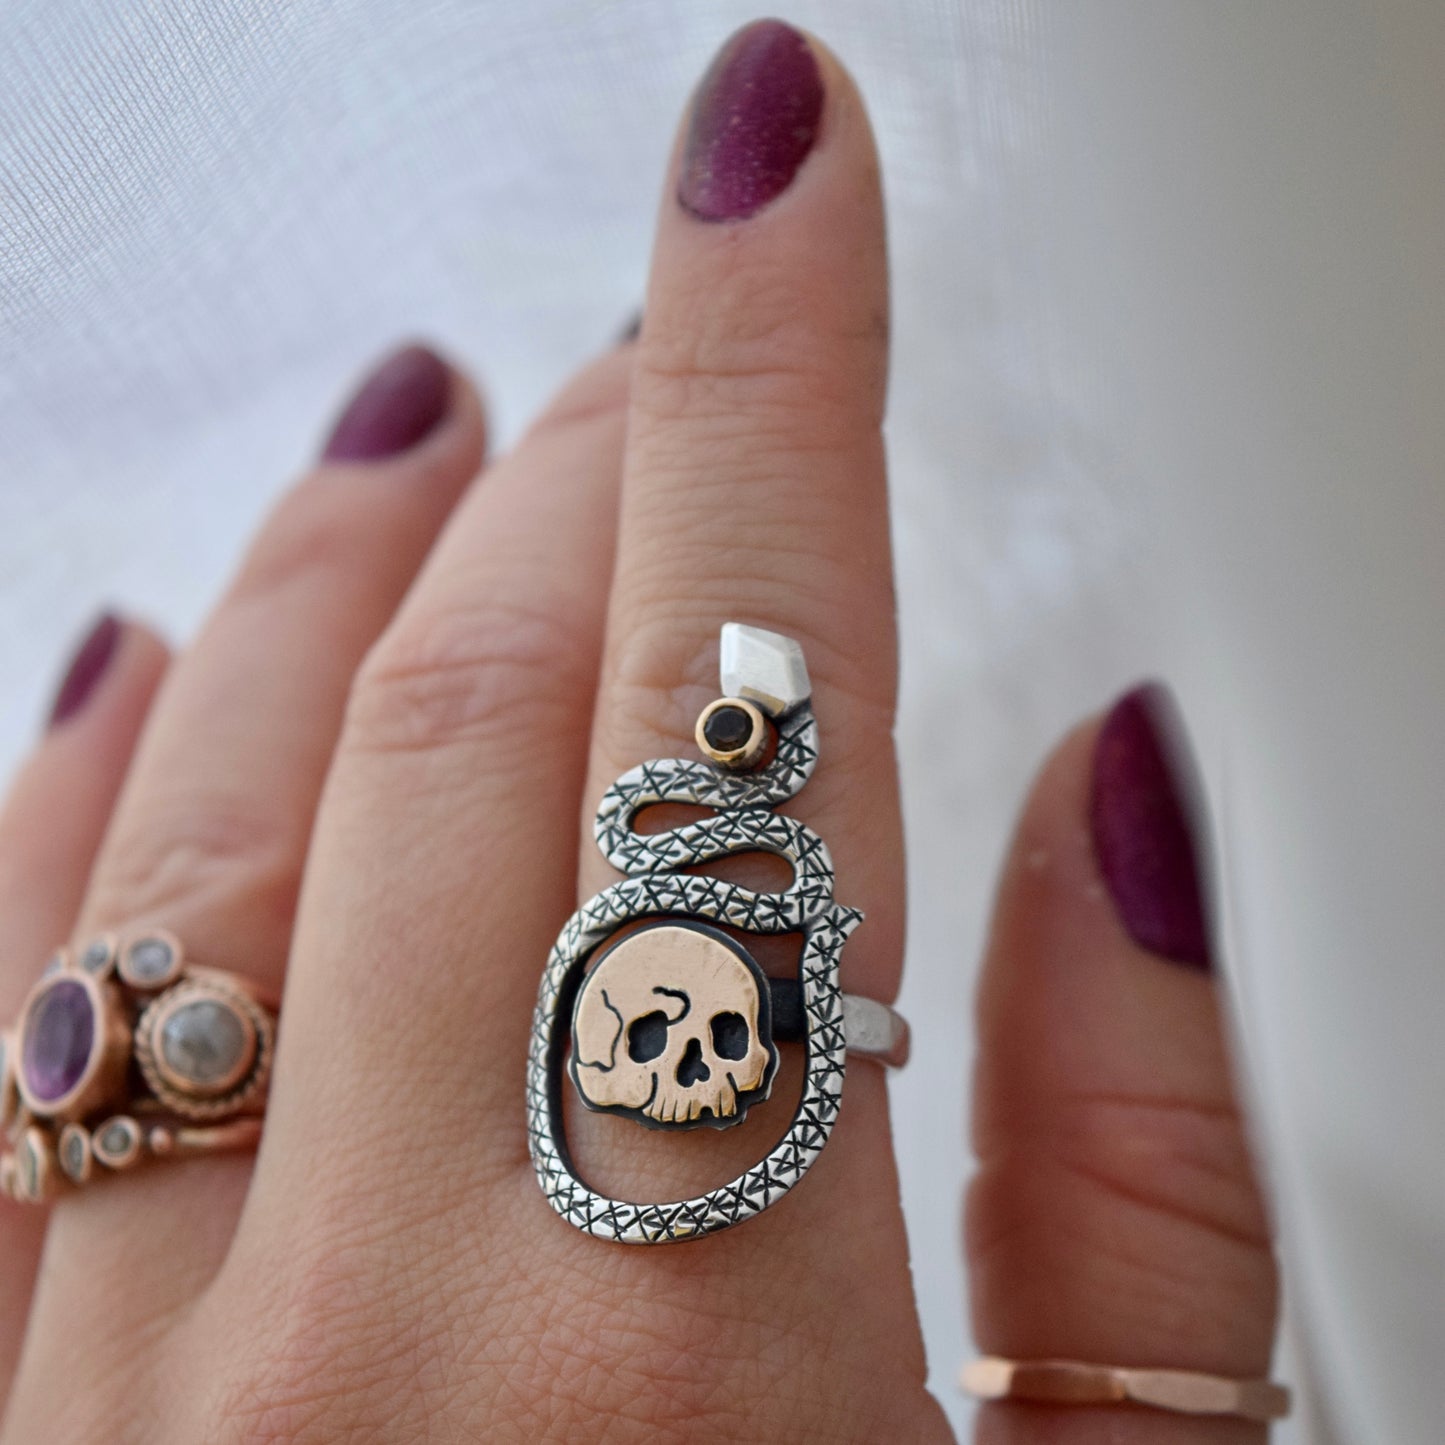 Serpent and Skull Ring with Gold Fill and Smokey Quartz Size 7